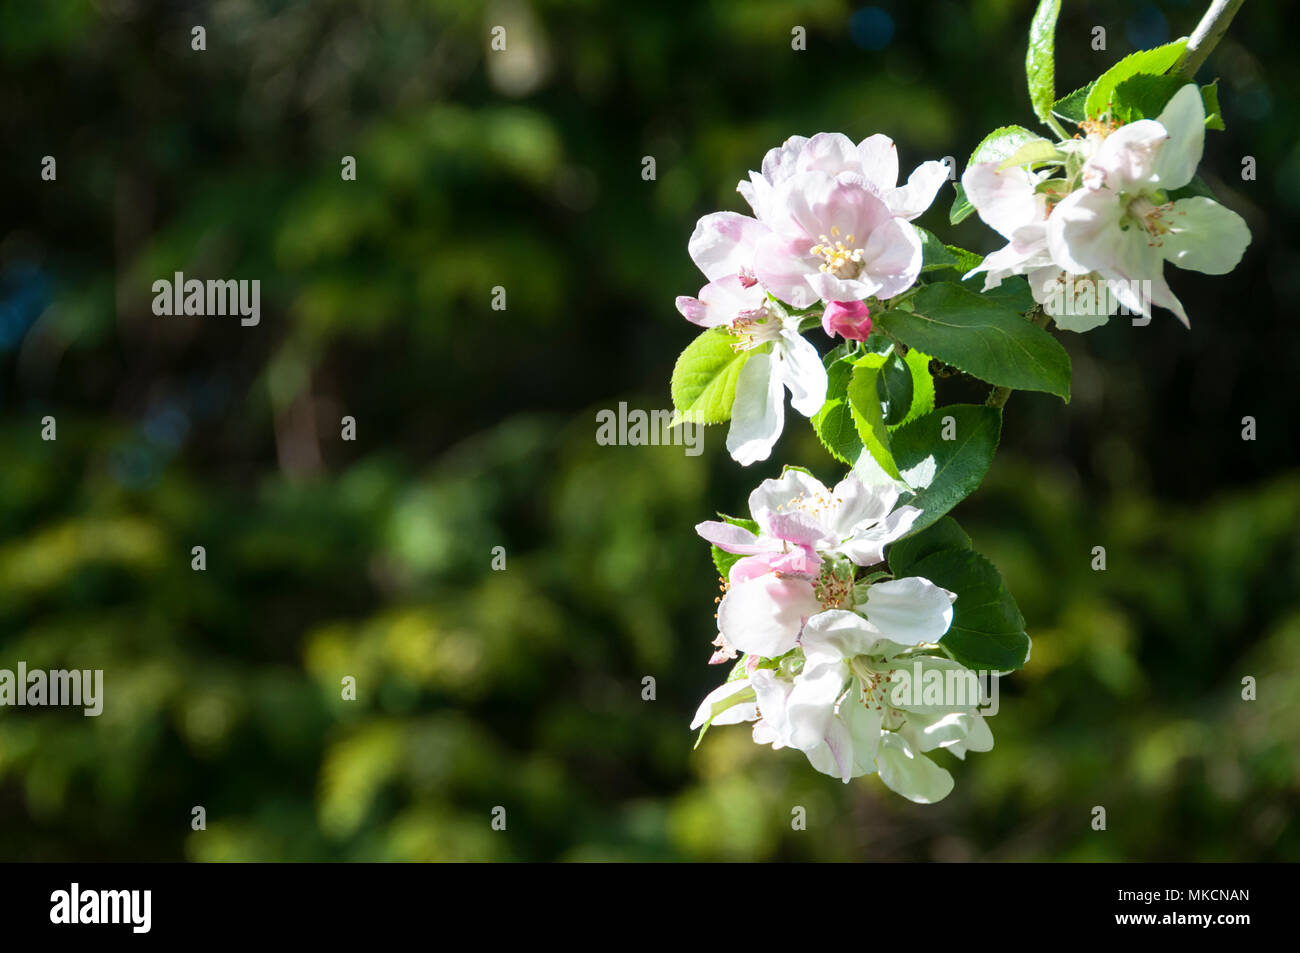 White apple blossom on branches of a Bramley apple tree, Malus domestica Stock Photo